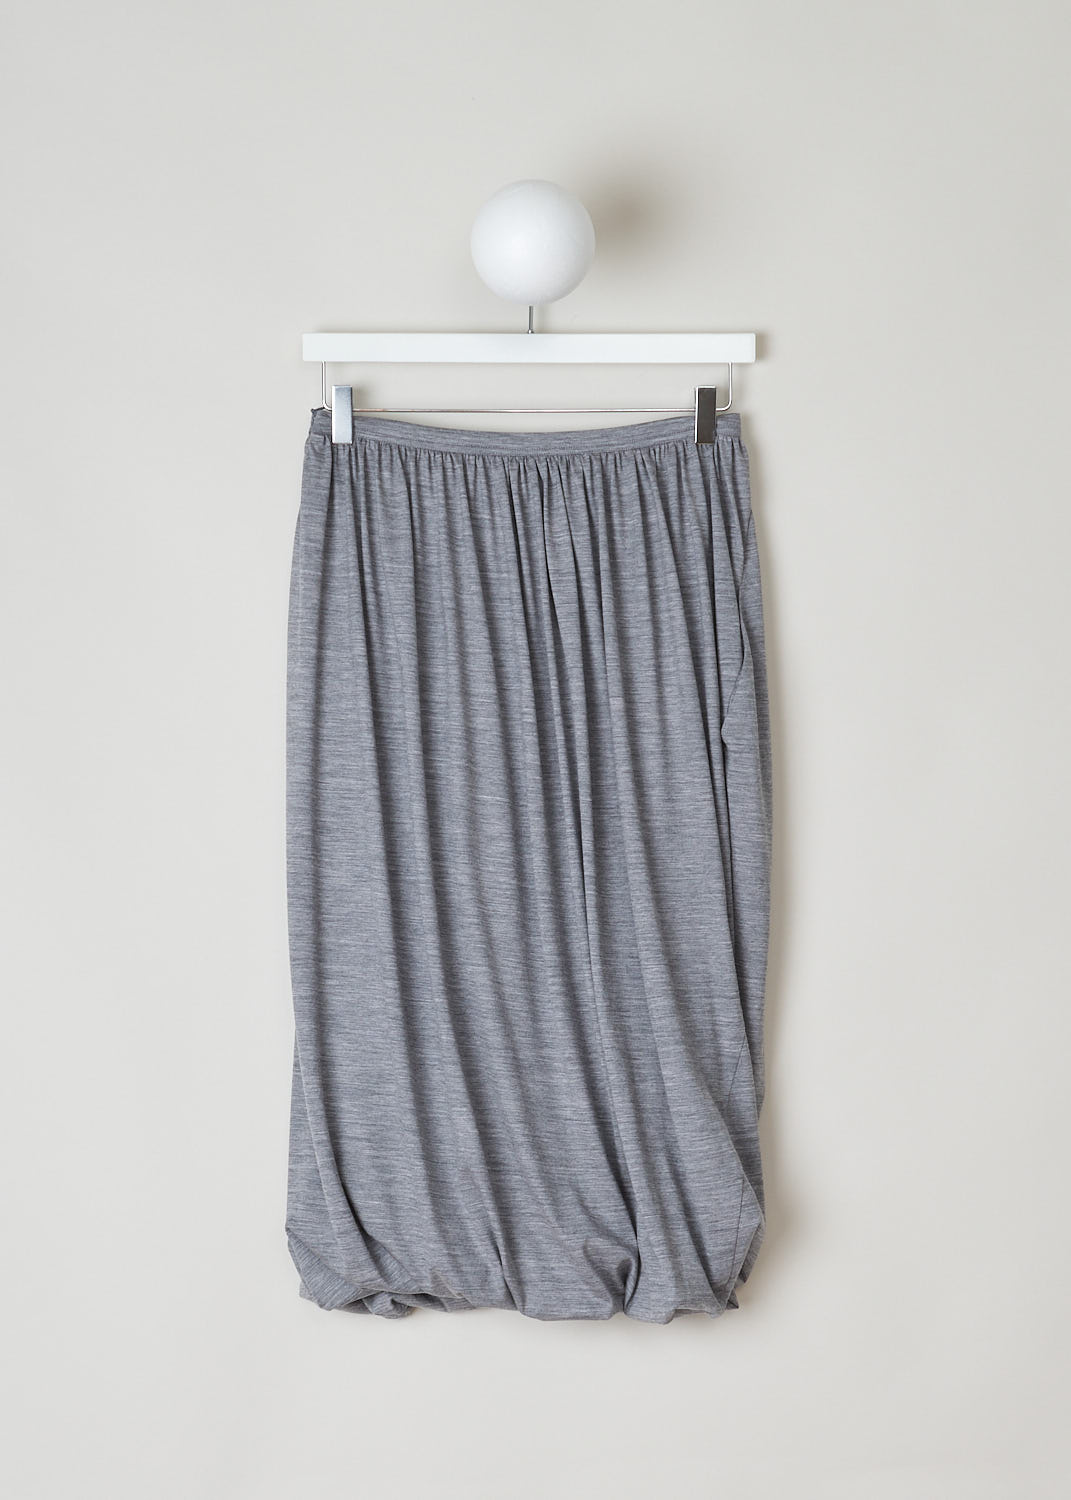 SOFIE Dâ€™HOORE, HEATHER GREY BALLOON SKIRT, SAOLA_WOJE_LIGHT_GREY_MELA, Grey, Back, This twisted balloon skirt in heather grey features a concealed side zip. A single side pocket can be found concealed in the seam.
